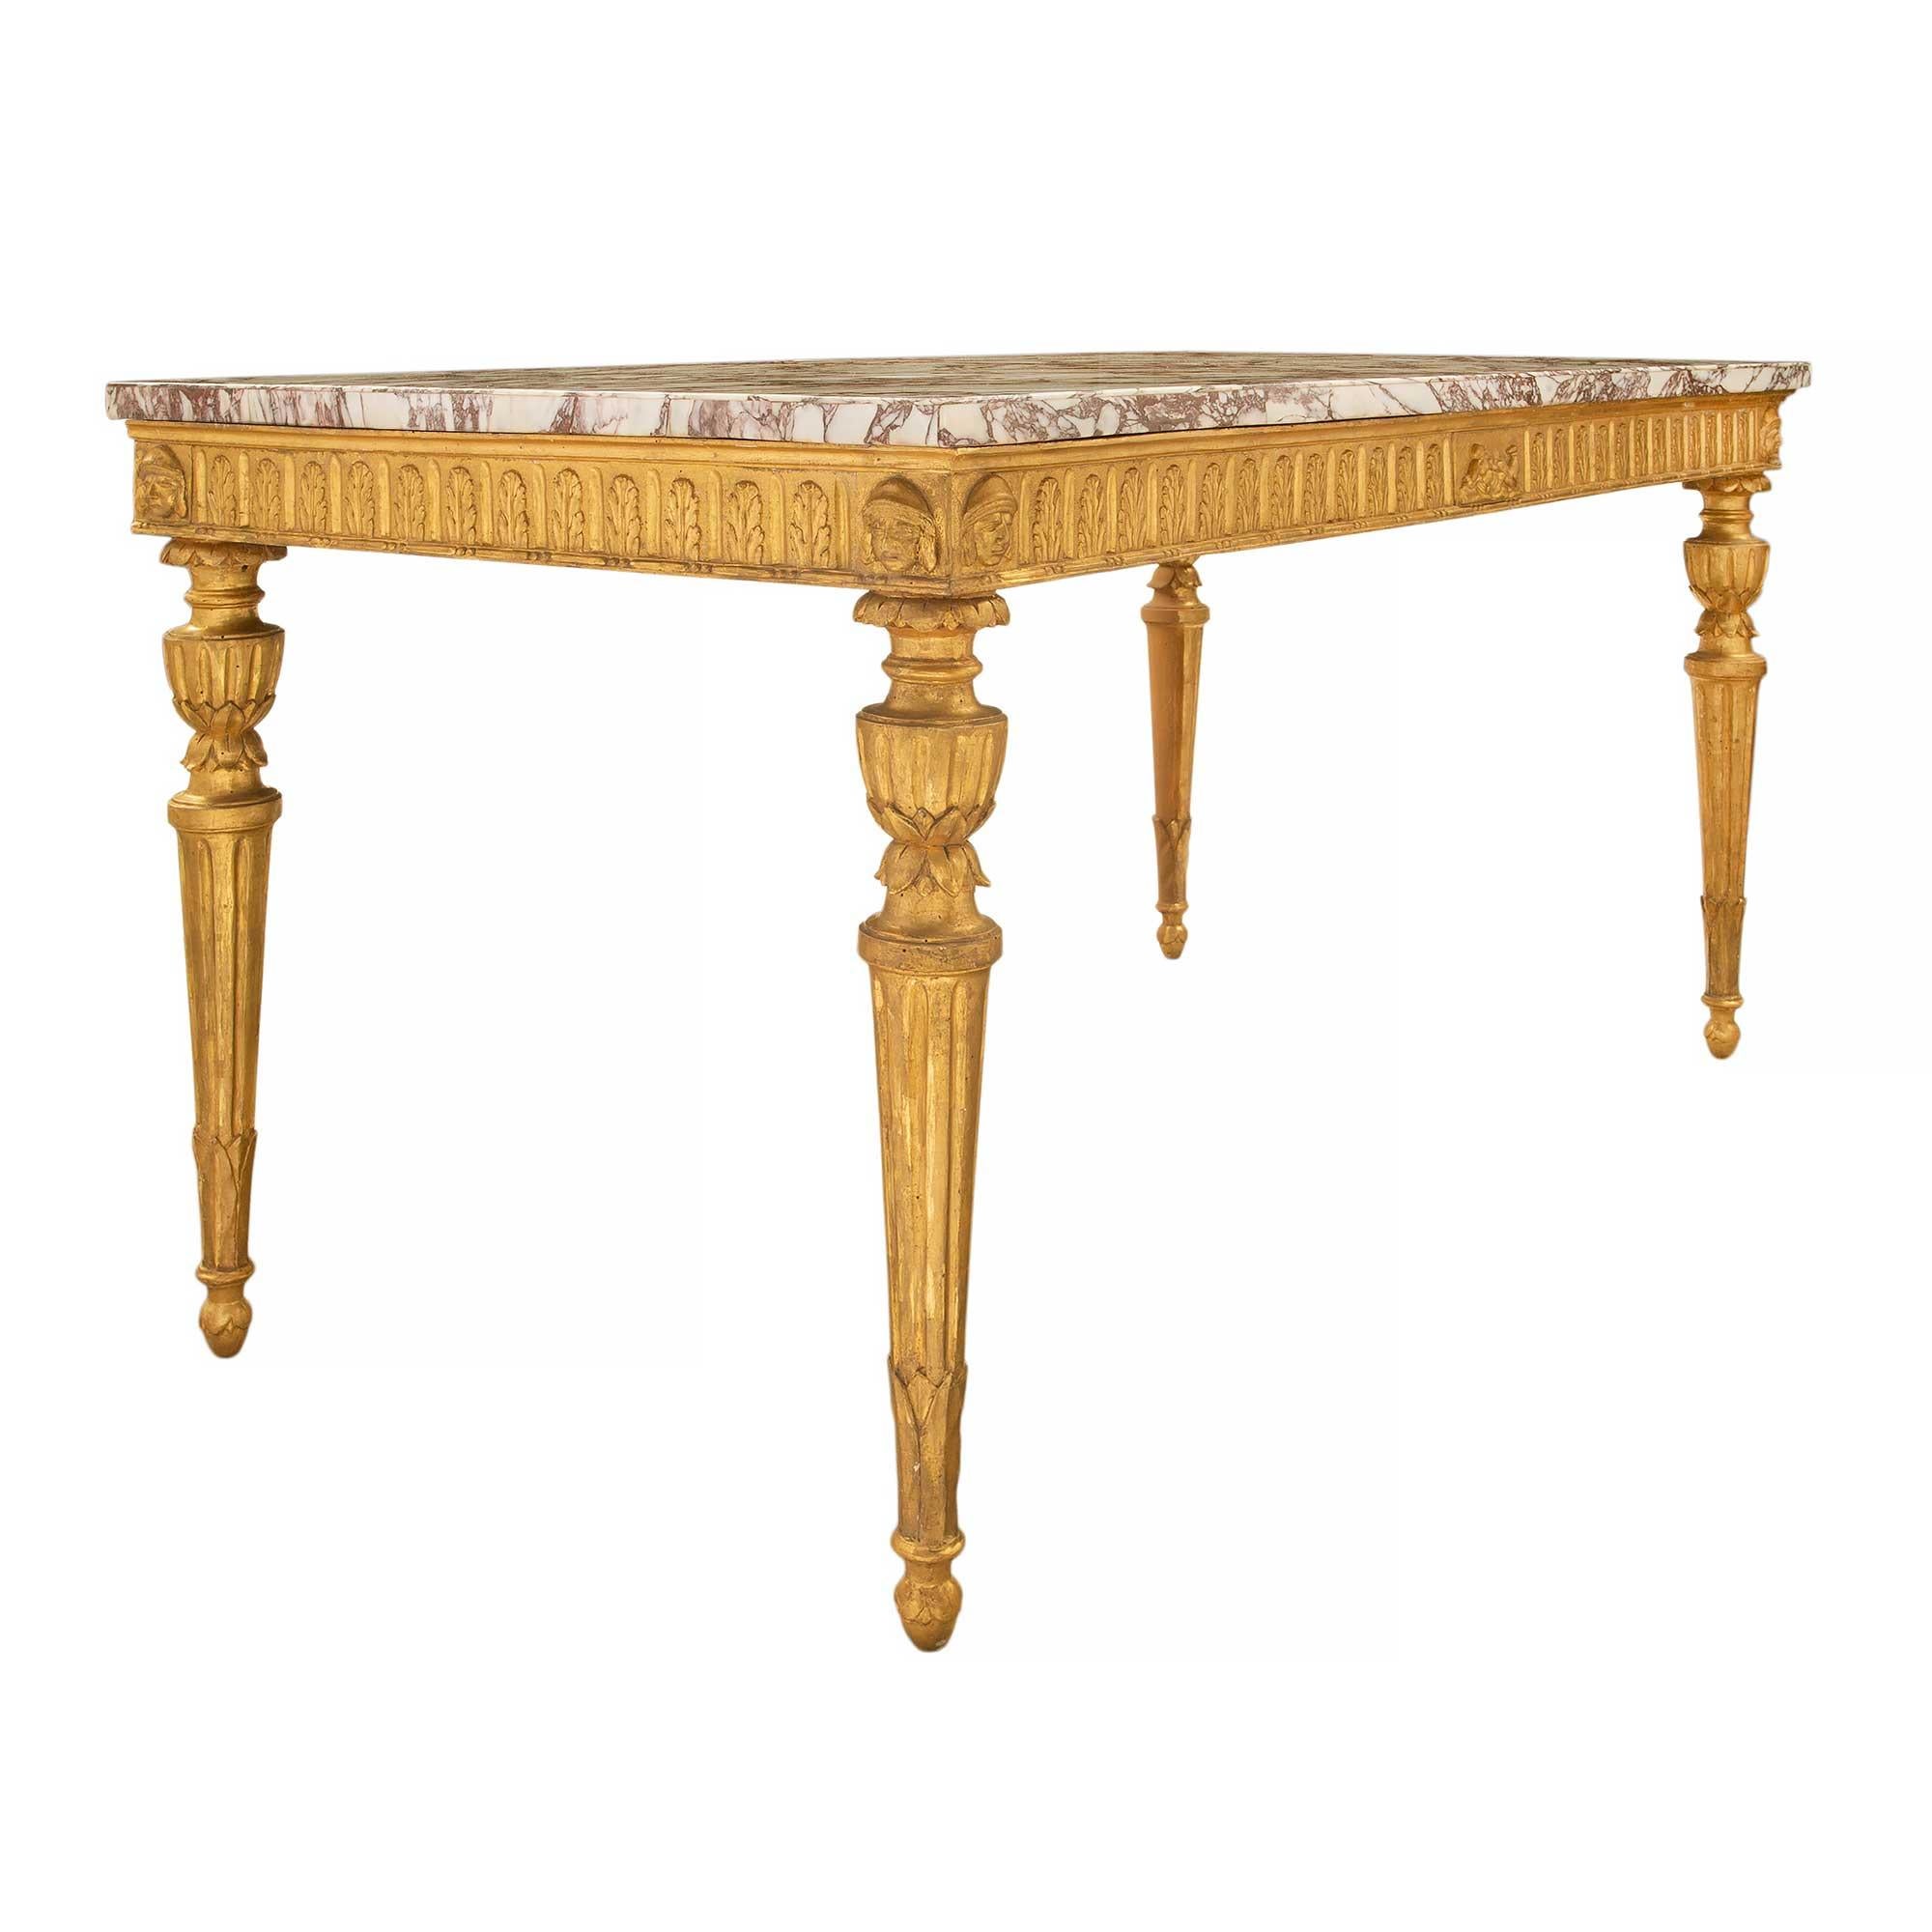 Italian 18th Century Louis XVI Period Giltwood Freestanding Console Table In Good Condition For Sale In West Palm Beach, FL